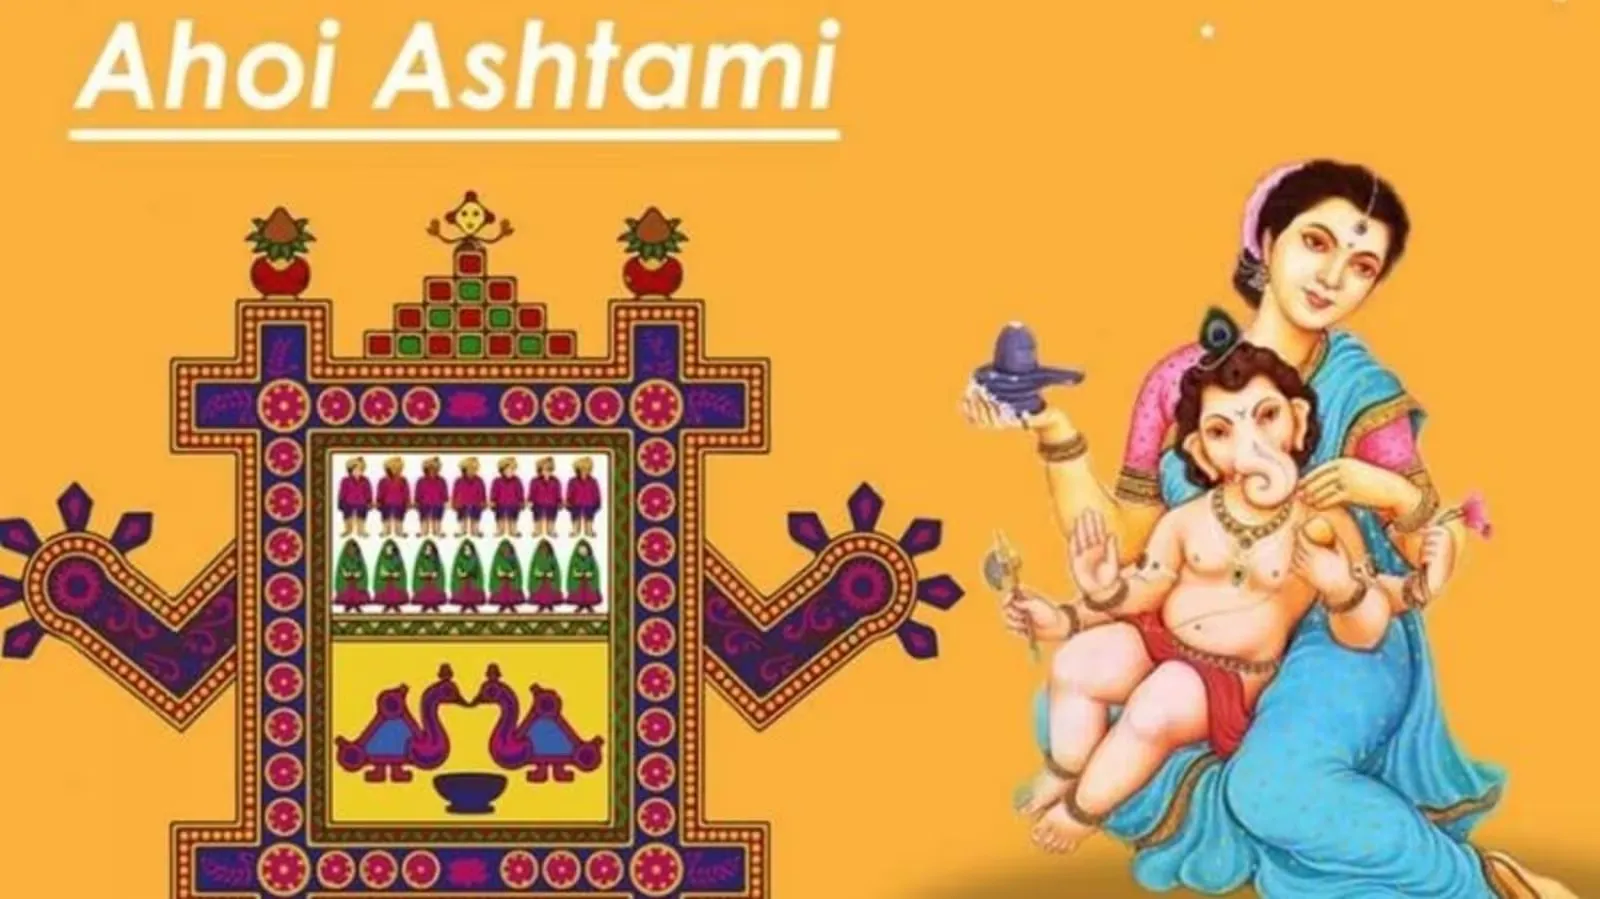 Ahoi Ashtami 2023: Read this story today while worshiping Ahoi Ashtami, all your wishes will be fulfilled.